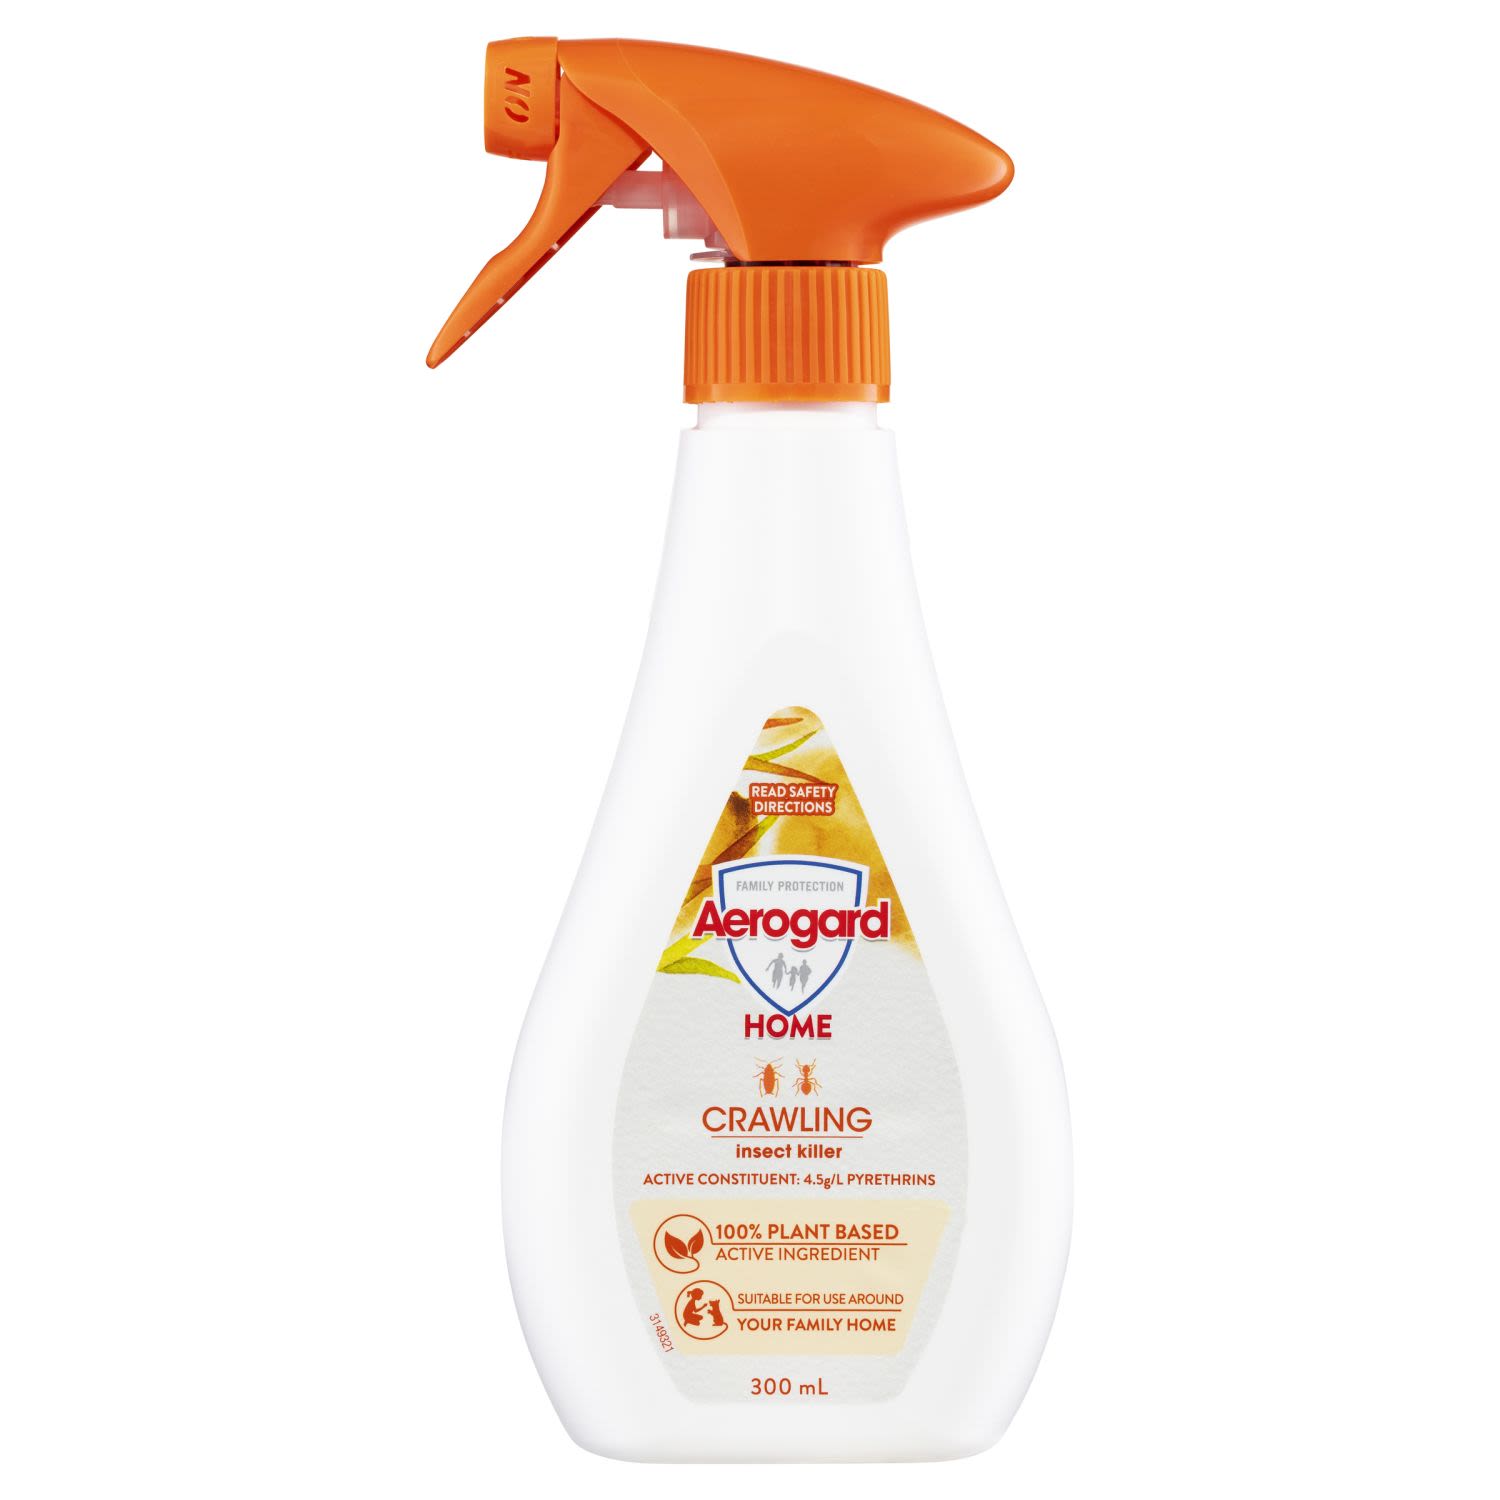 Aerogard Home Crawling Insect Killer Spray uses a 100% plant based active ingredient to effectively kill ants, cockroaches and spiders.  <br /><br /> <br /><br />·       100% plant based active ingredient<br /><br />·       Suitable for use around your family home<br /><br />·       May be used on windows, floors, in cupboards, under sinks, around appliances and any other areas where insects are visible<br /><br /> <br /><br />contains synthetic emulsifiers, solvents, fragrances, preservatives & stabilisers<br /> <br /> <br /><br />Country of Origin: Made in New Zealand